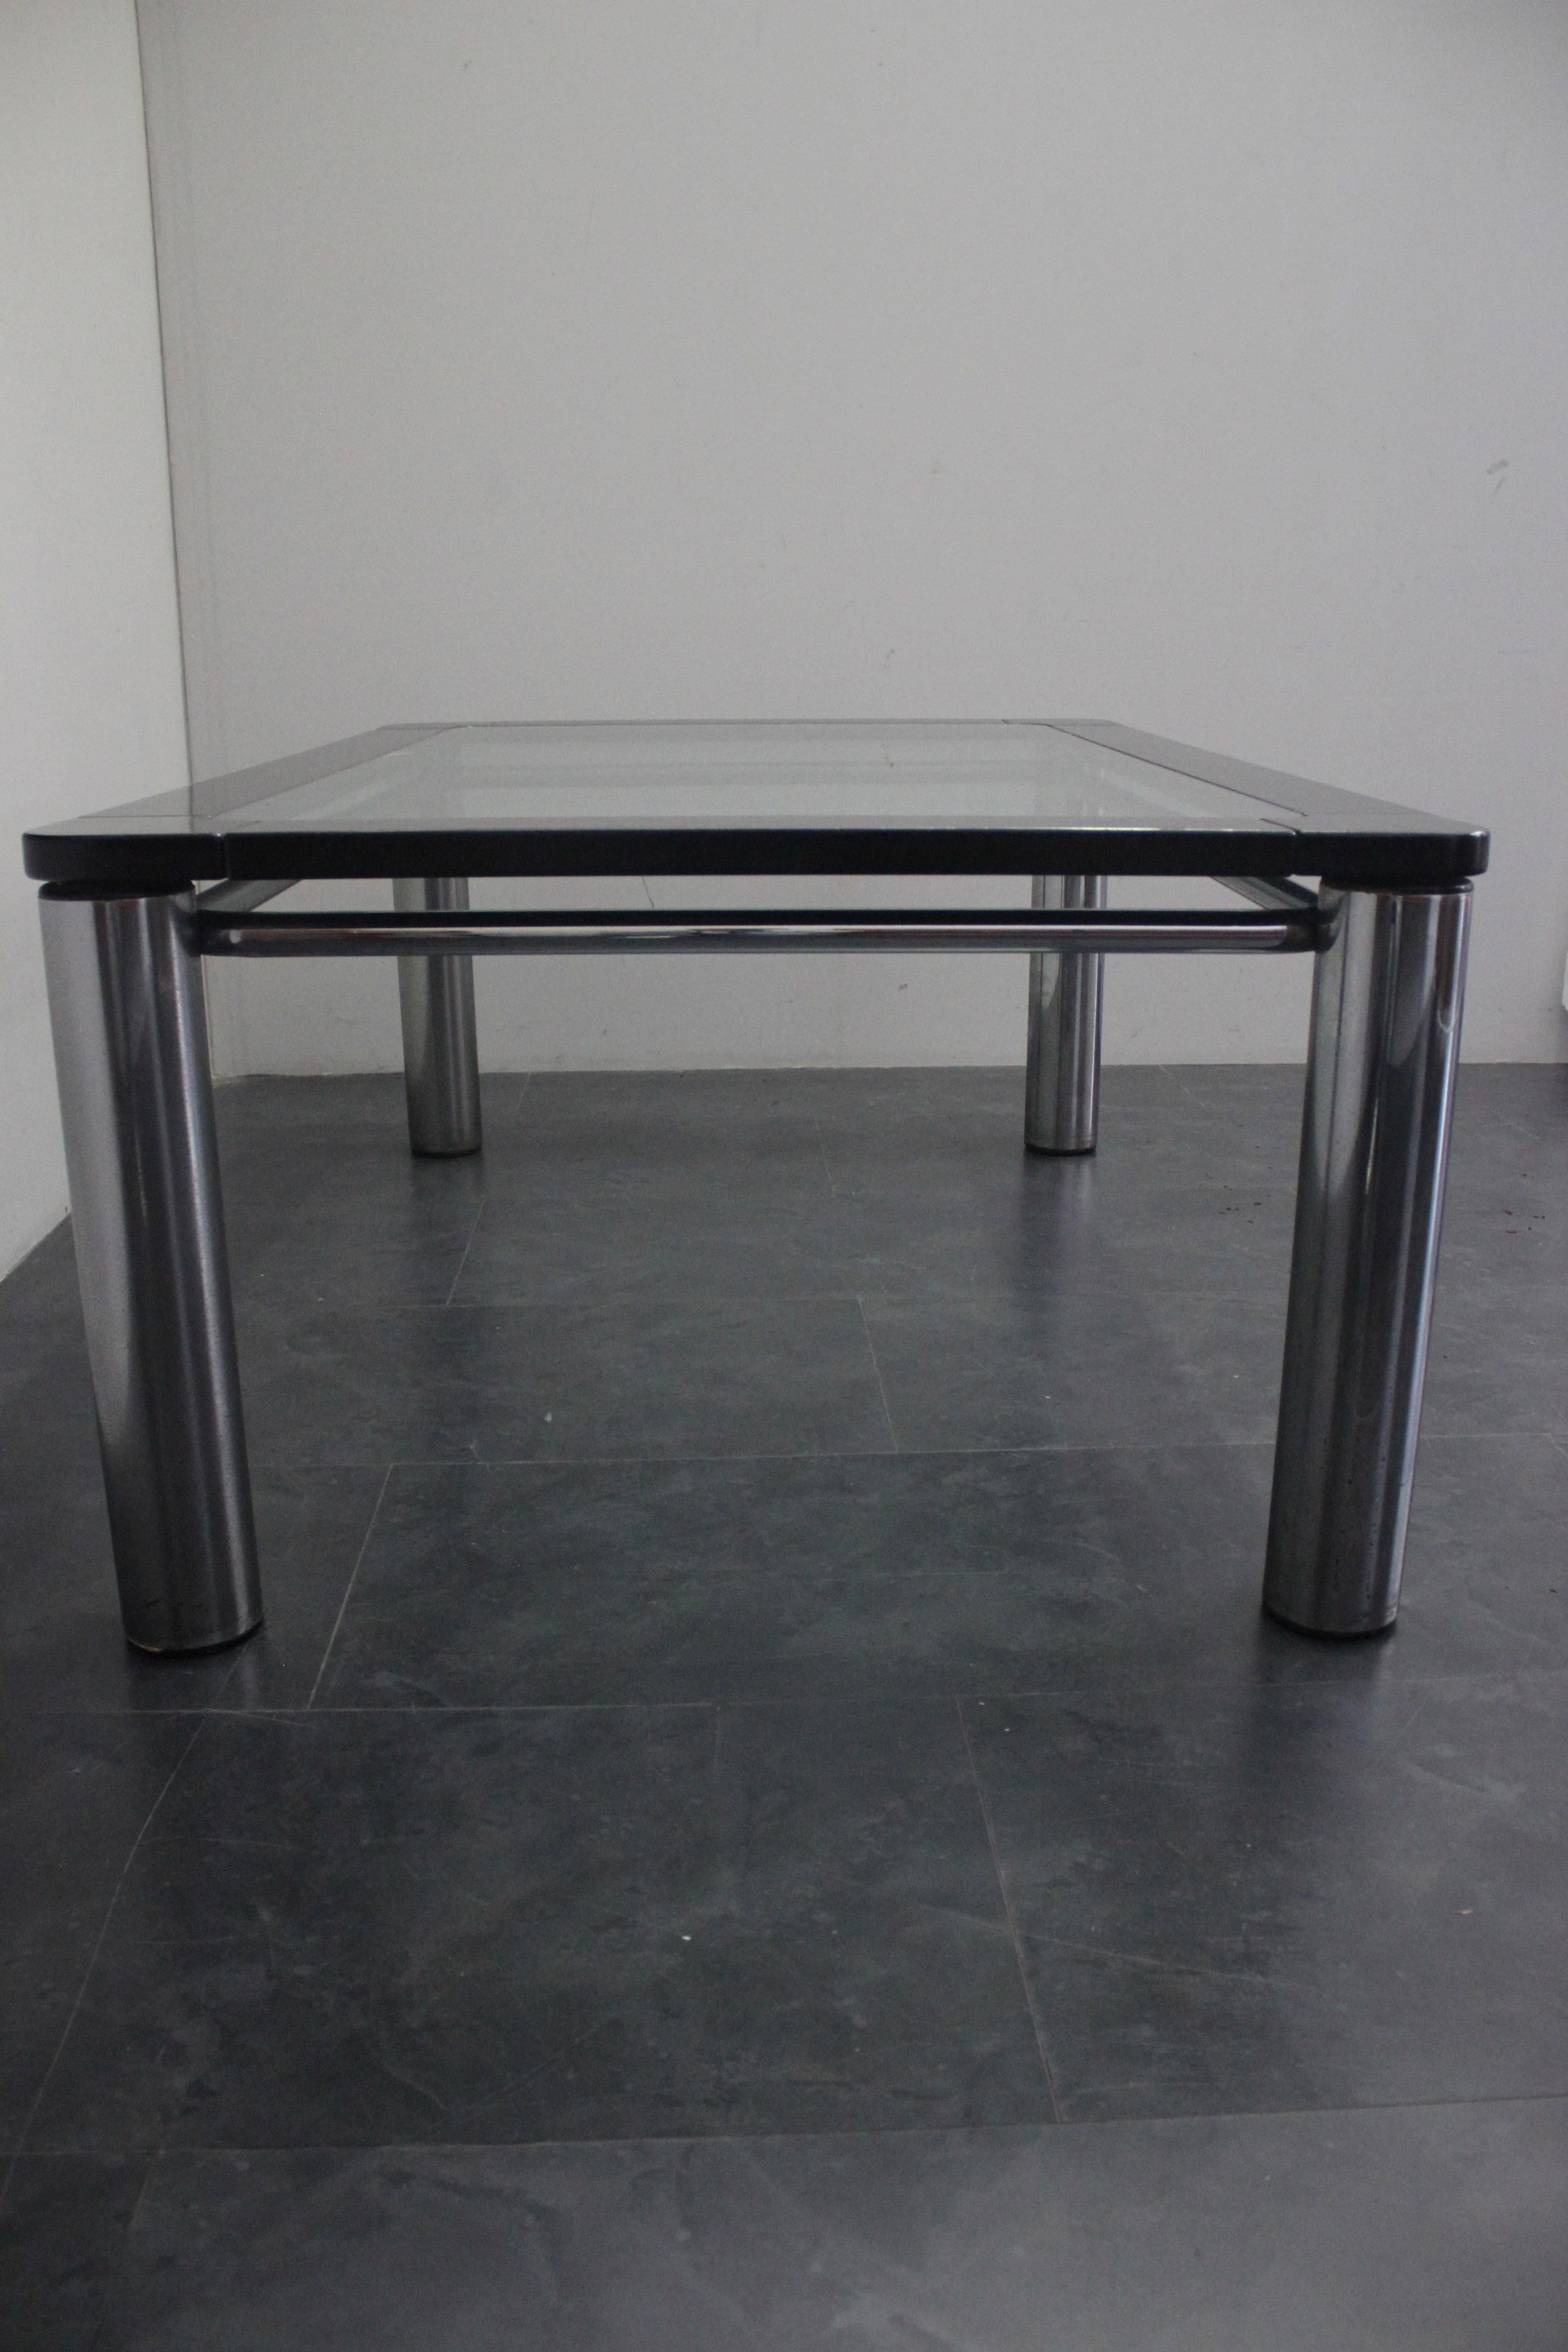 Late 20th Century Black Lacquer Wood, Steel, and Glass Dining Table by Marco Zanuso for Zanotta For Sale